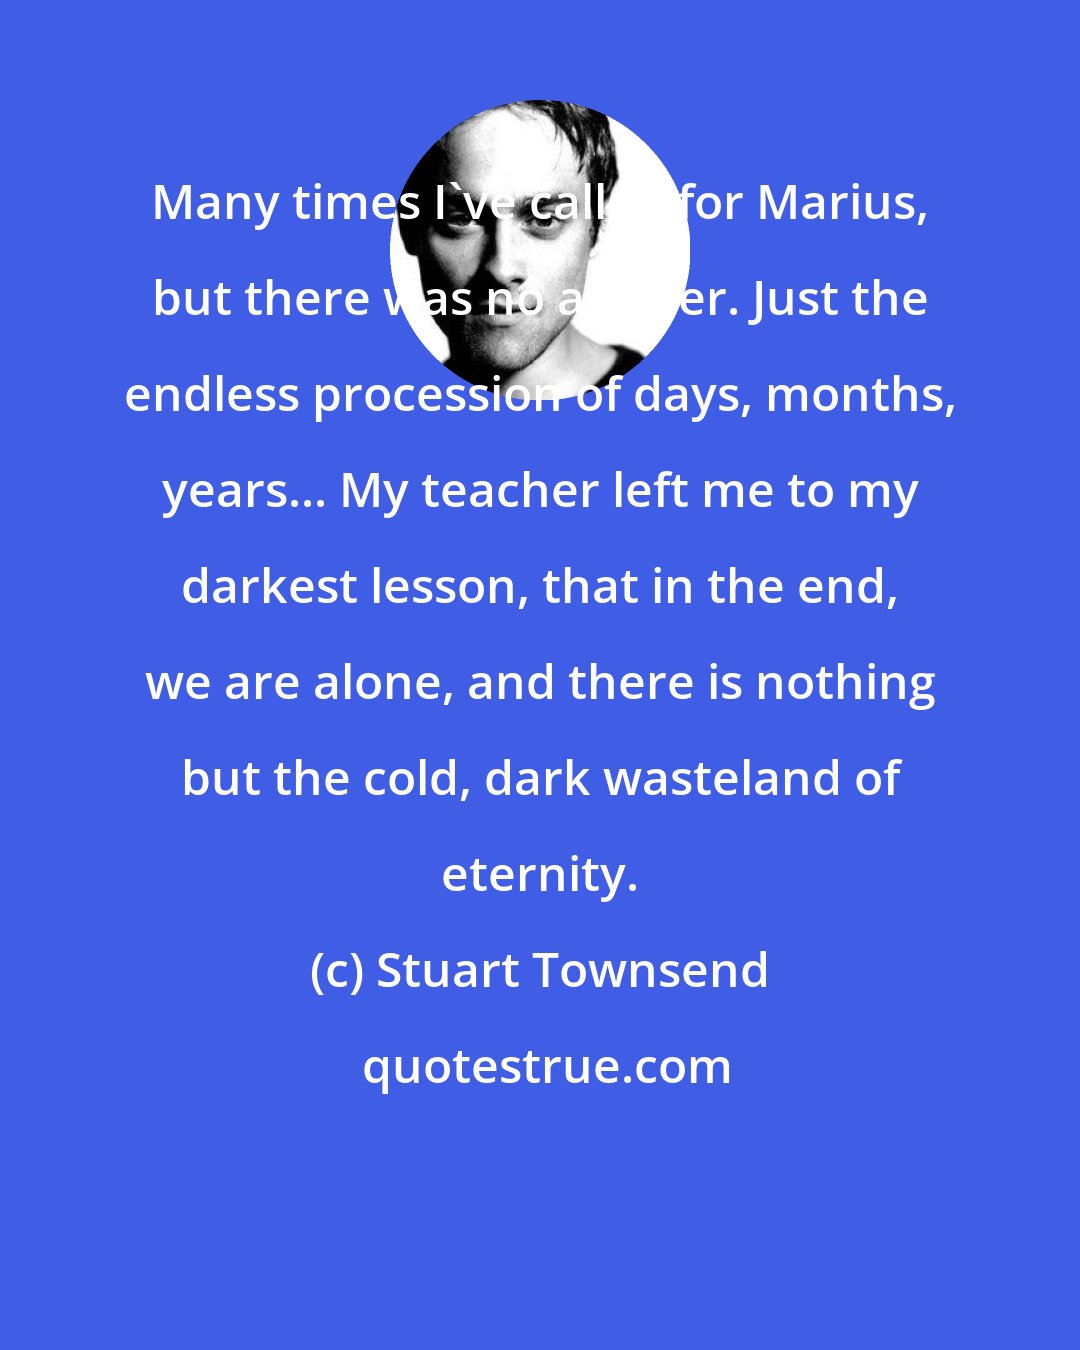 Stuart Townsend: Many times I've called for Marius, but there was no answer. Just the endless procession of days, months, years... My teacher left me to my darkest lesson, that in the end, we are alone, and there is nothing but the cold, dark wasteland of eternity.